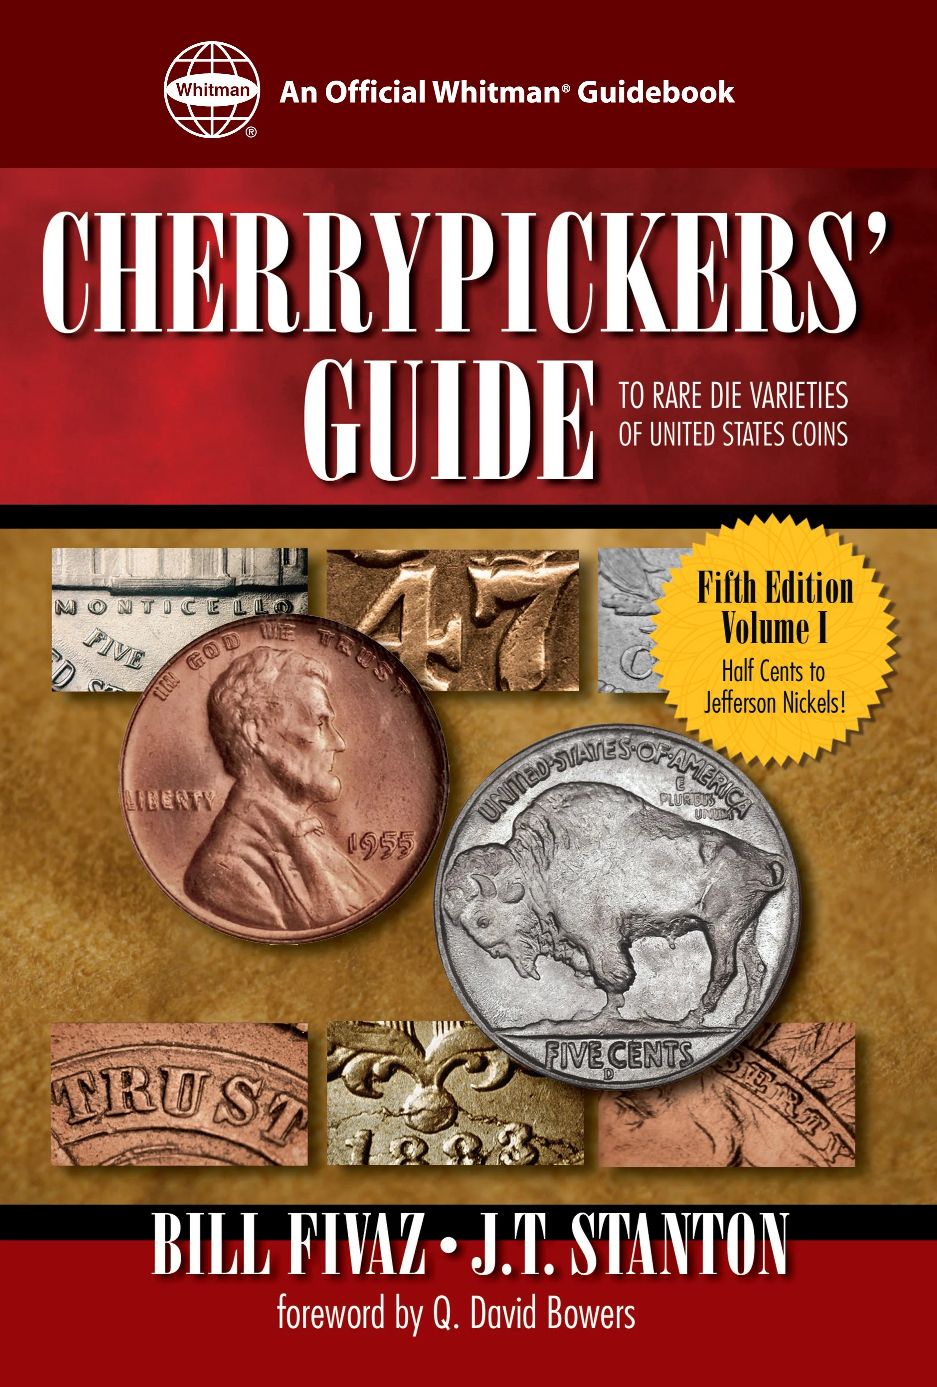 [PDF/ePub] Cherrypickers' Guide to Rare Die Varieties of United States Coins